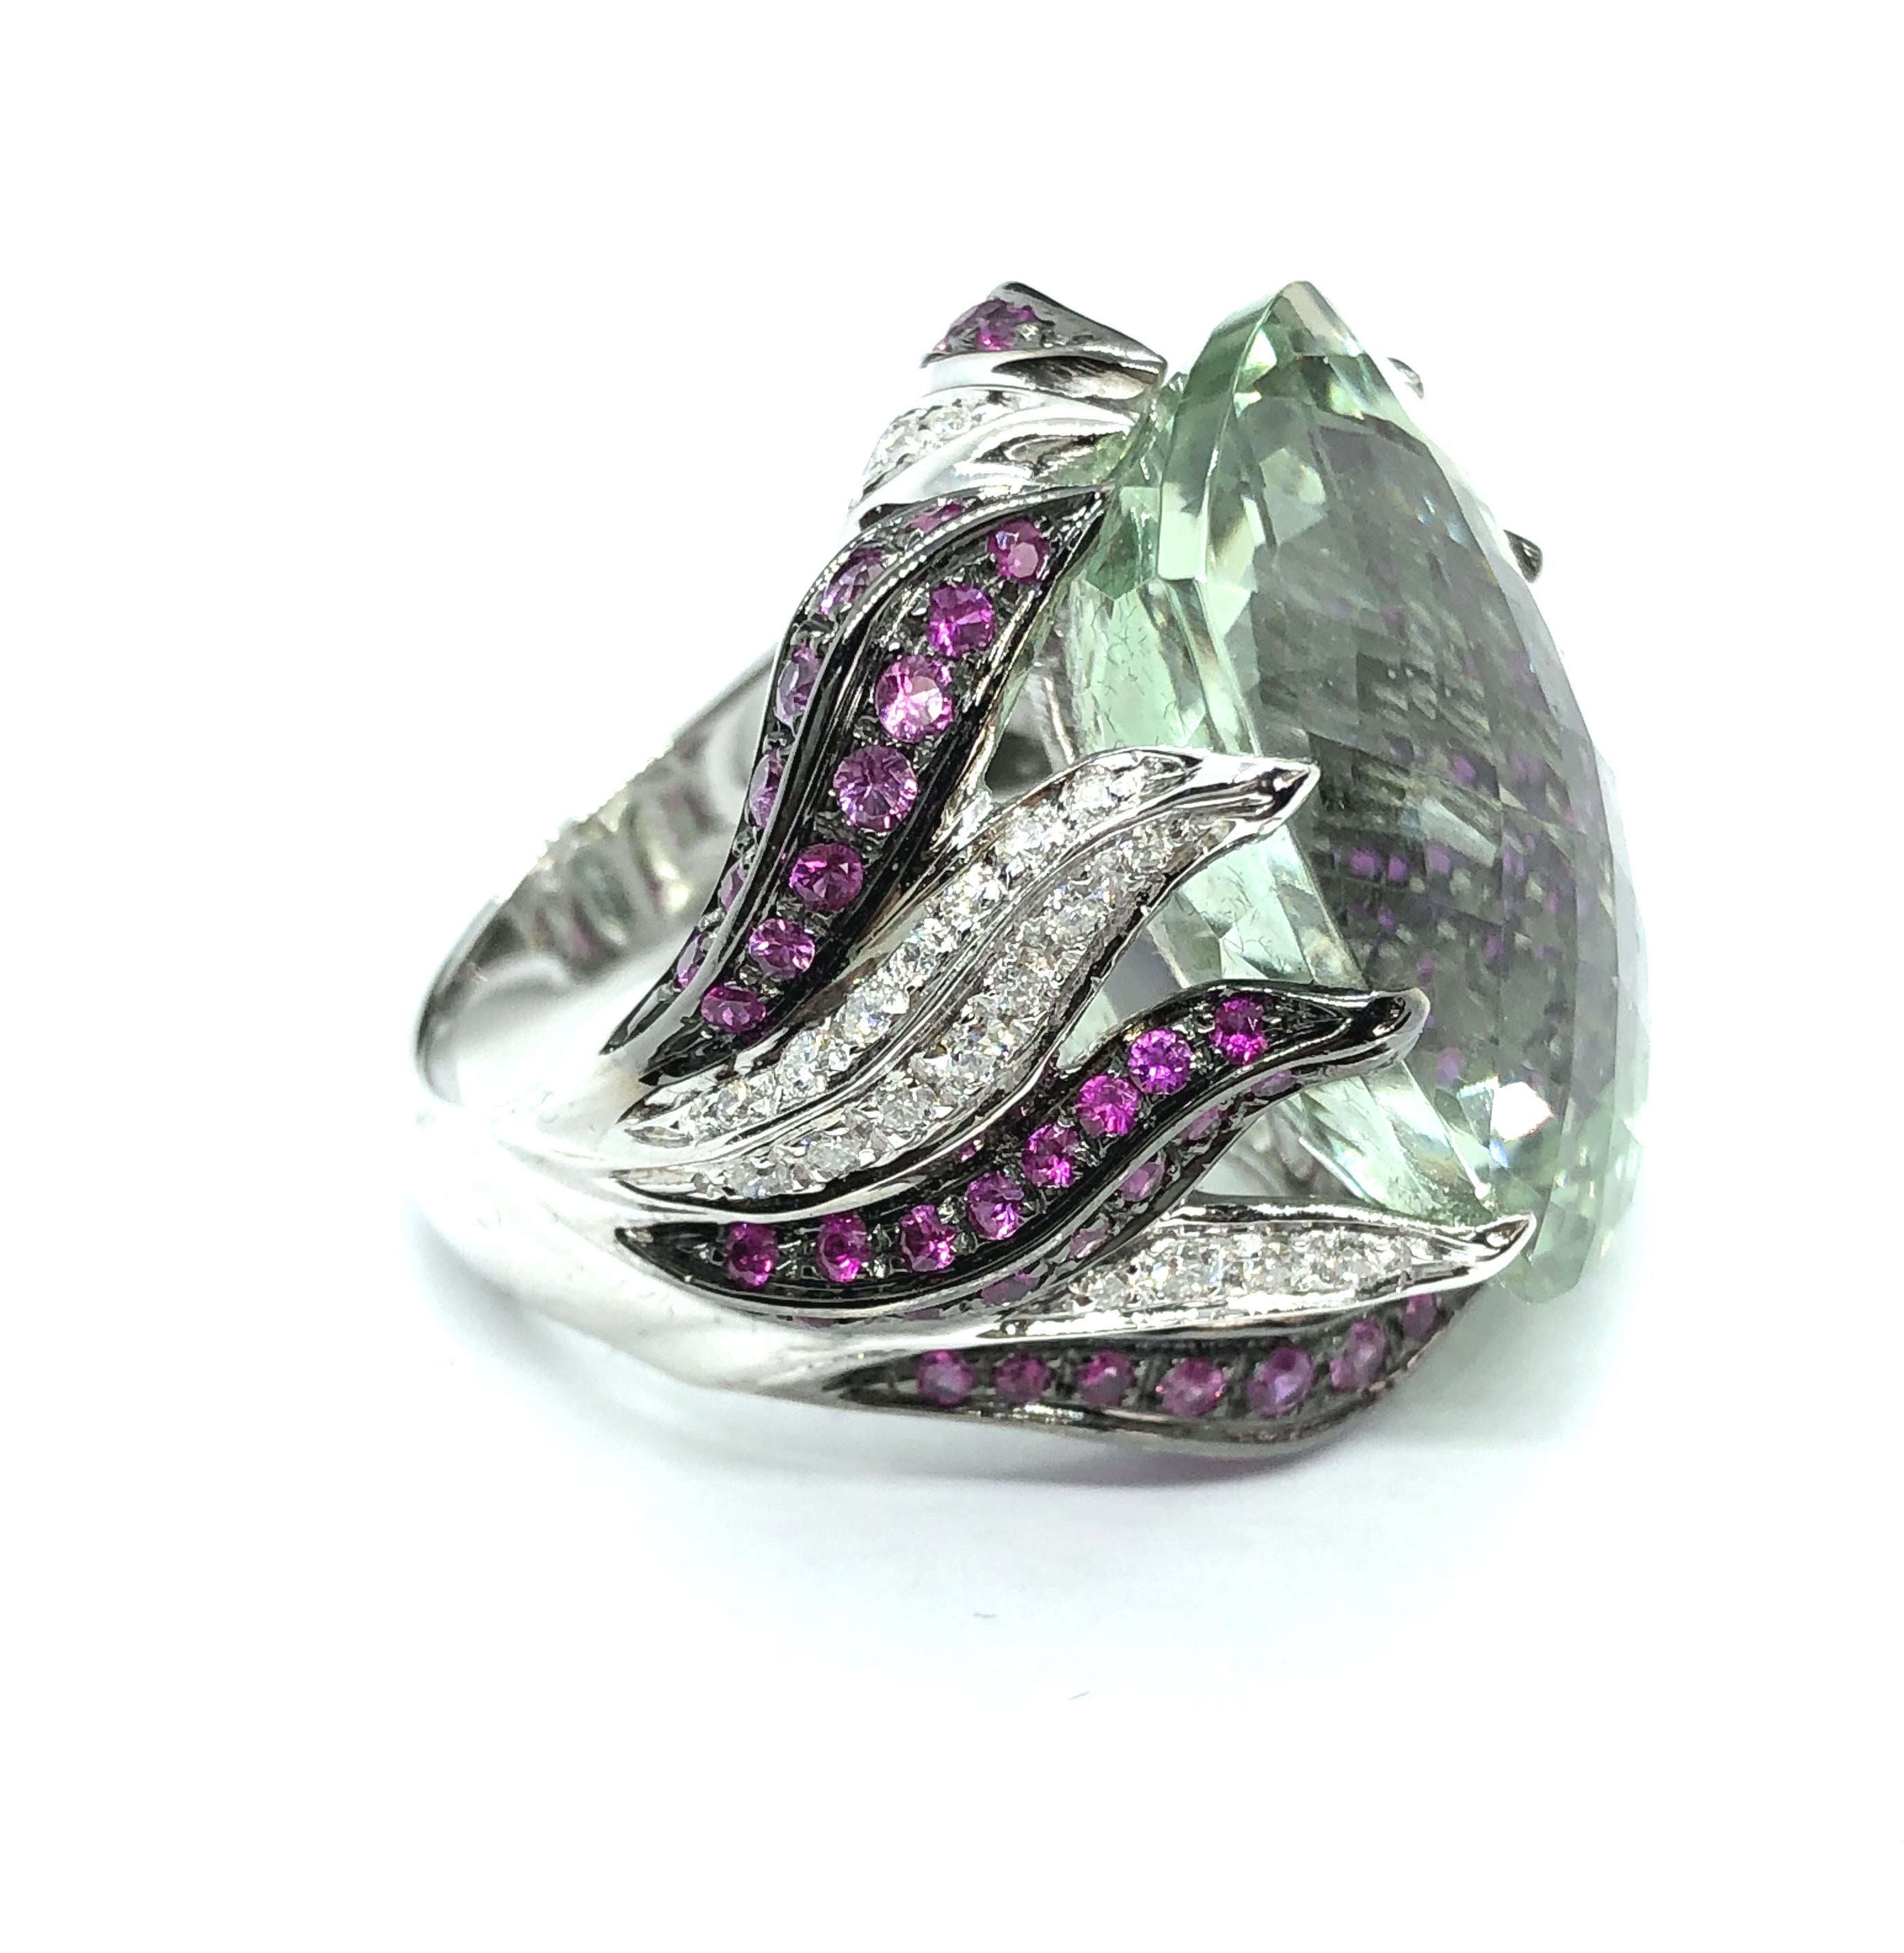 23 Ct Green Prasiolite White Gold Cocktail Ring Diamond and Pink Sapphires Flame For Sale 9